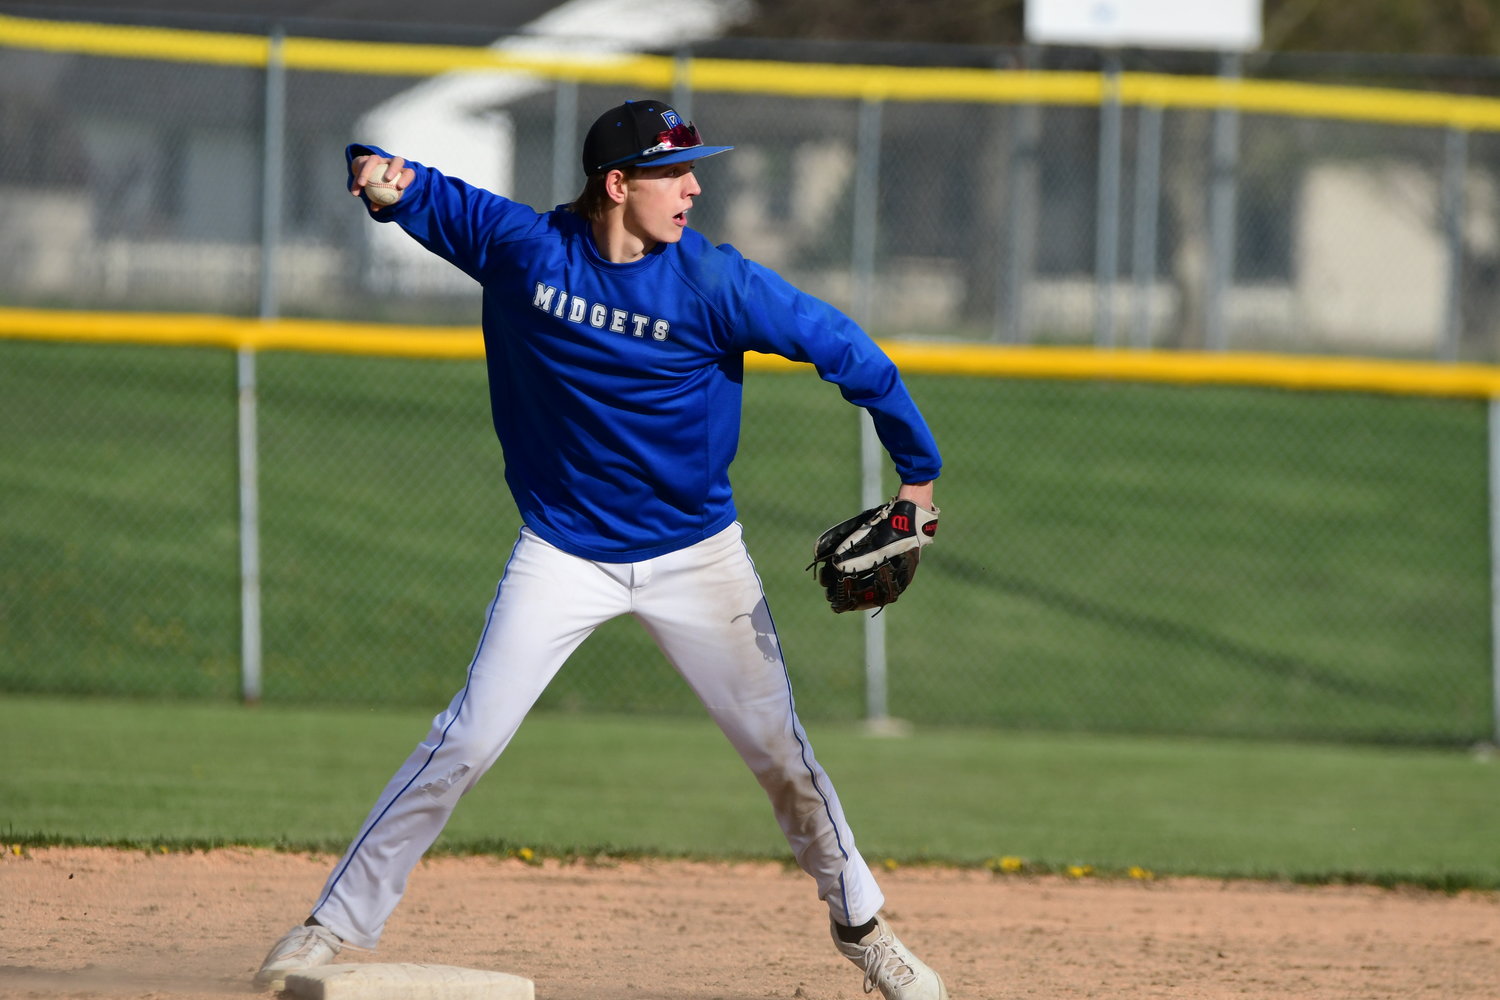 Photos from Monday’s baseball game between Kirksville and Putnam County.